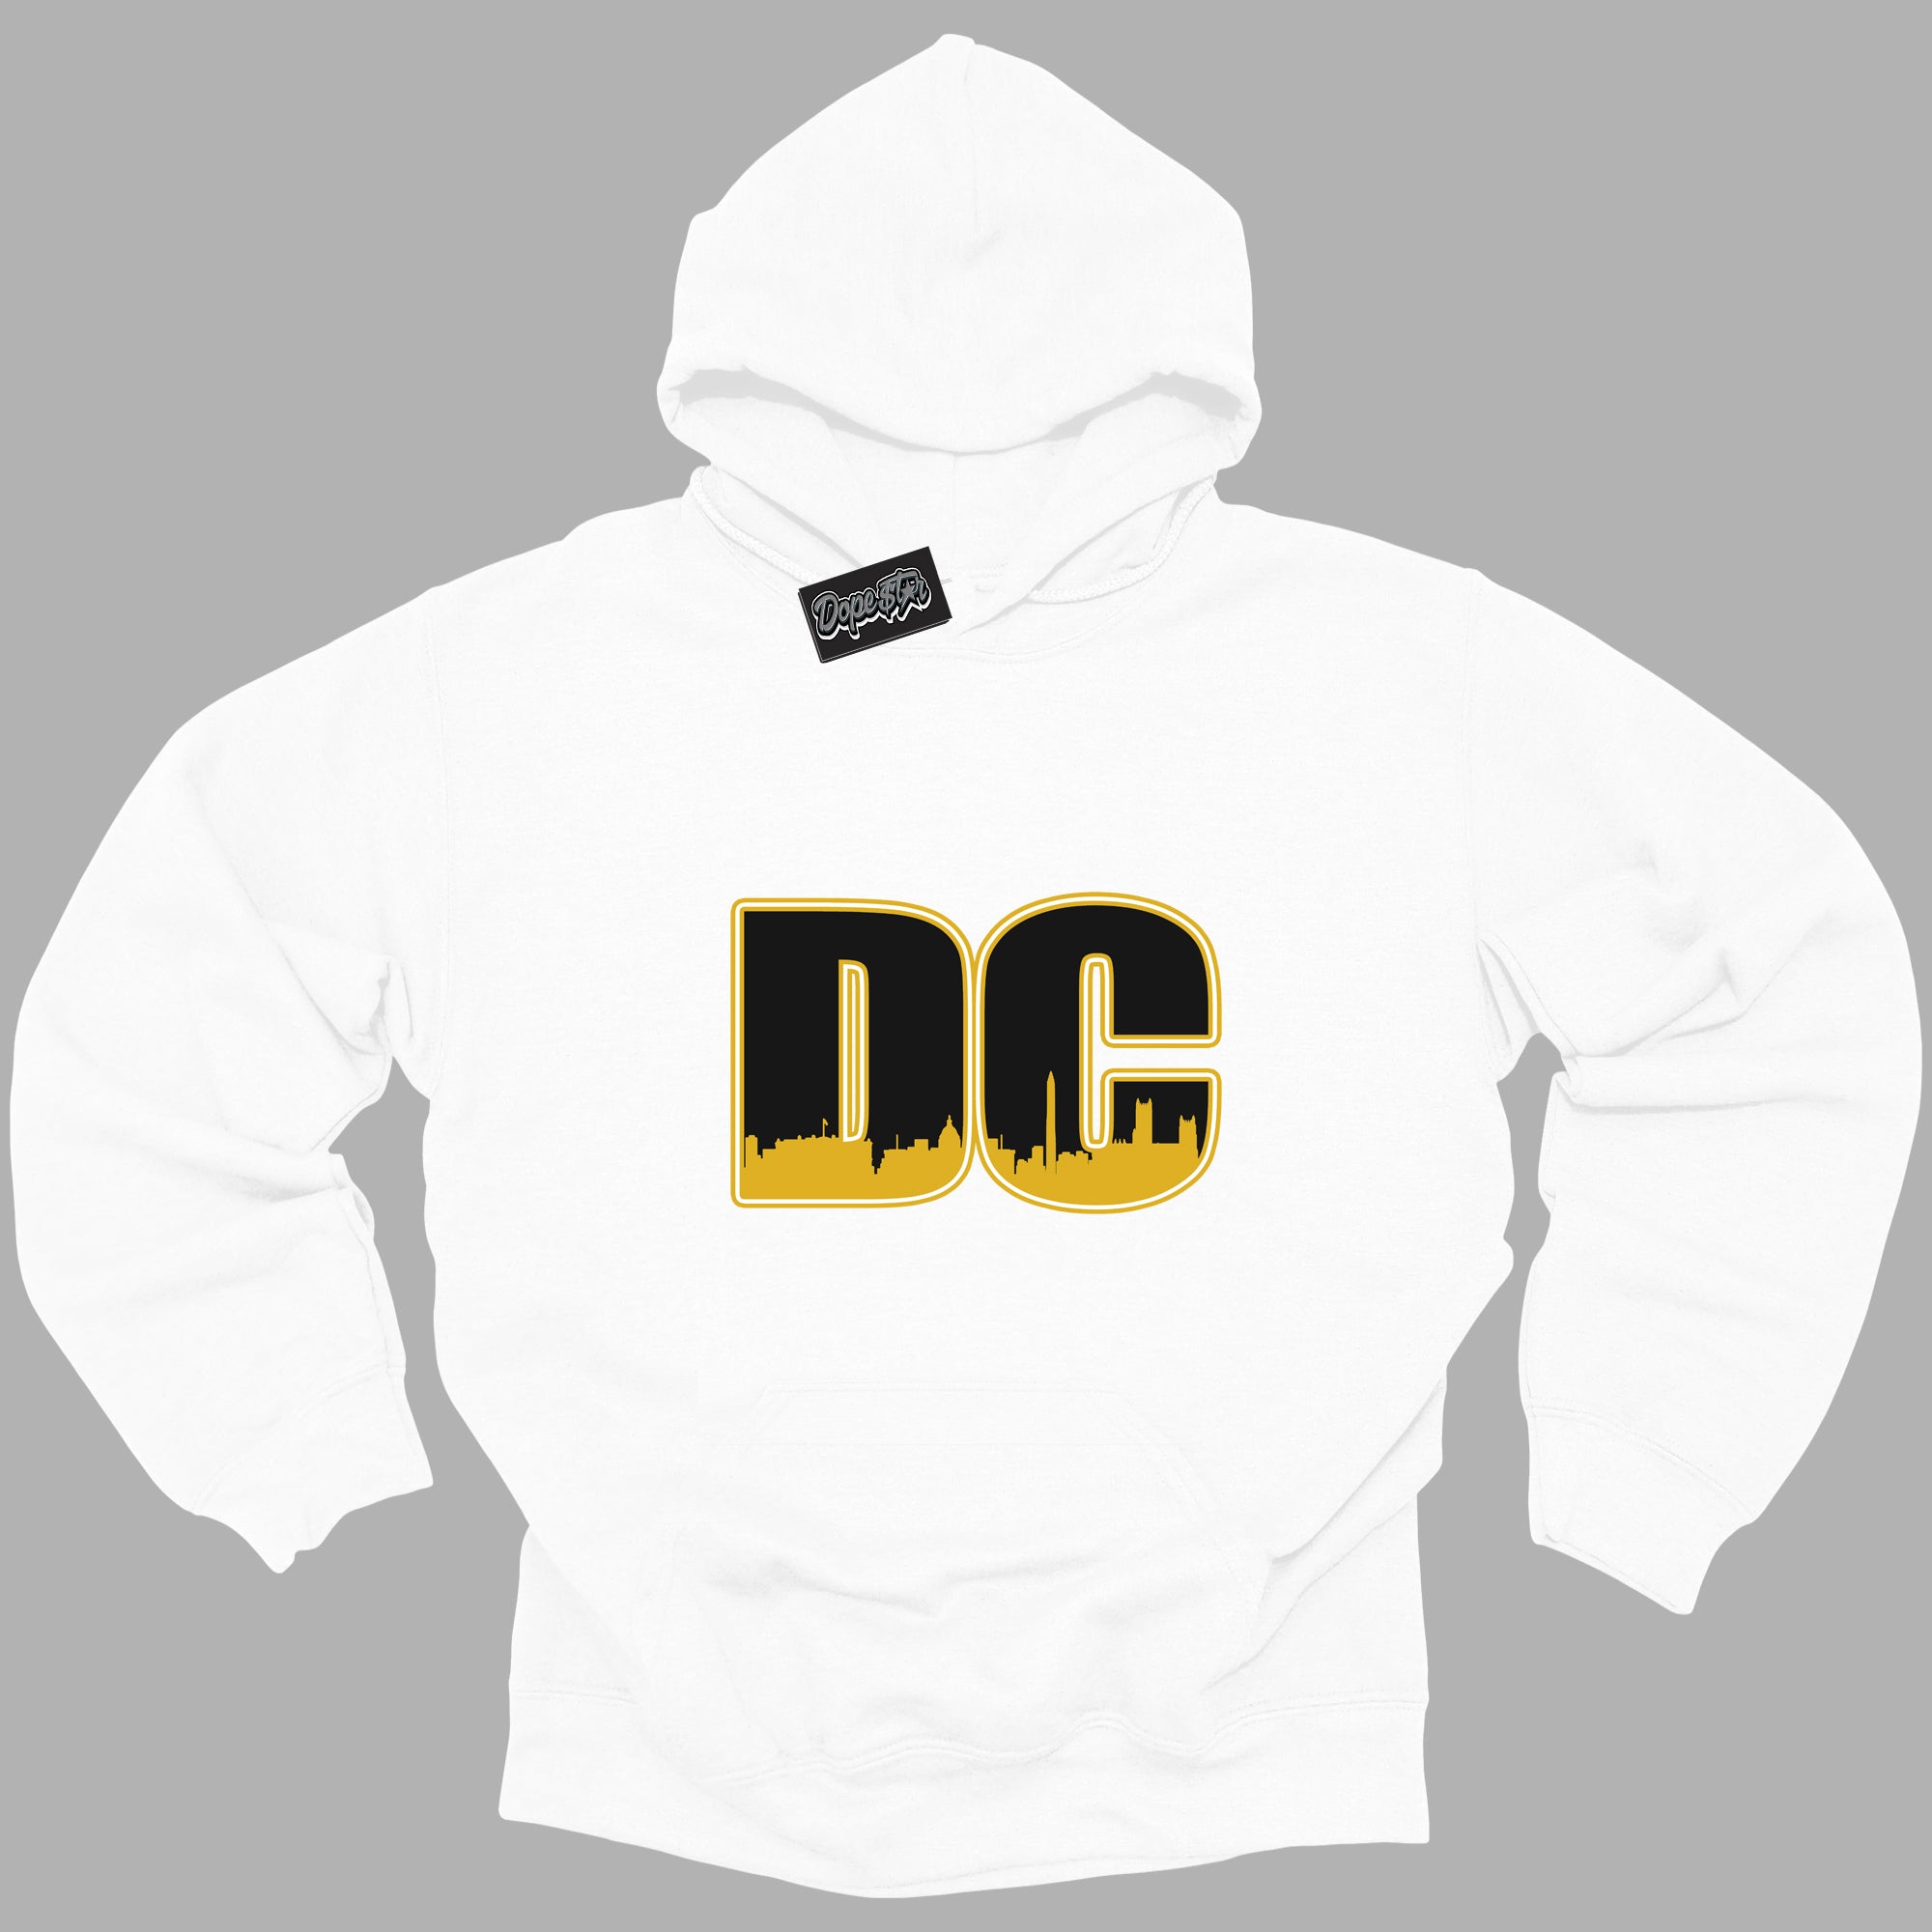 Cool White Hoodie with “ DC ”  design that Perfectly Matches Yellow Ochre 6s Sneakers.